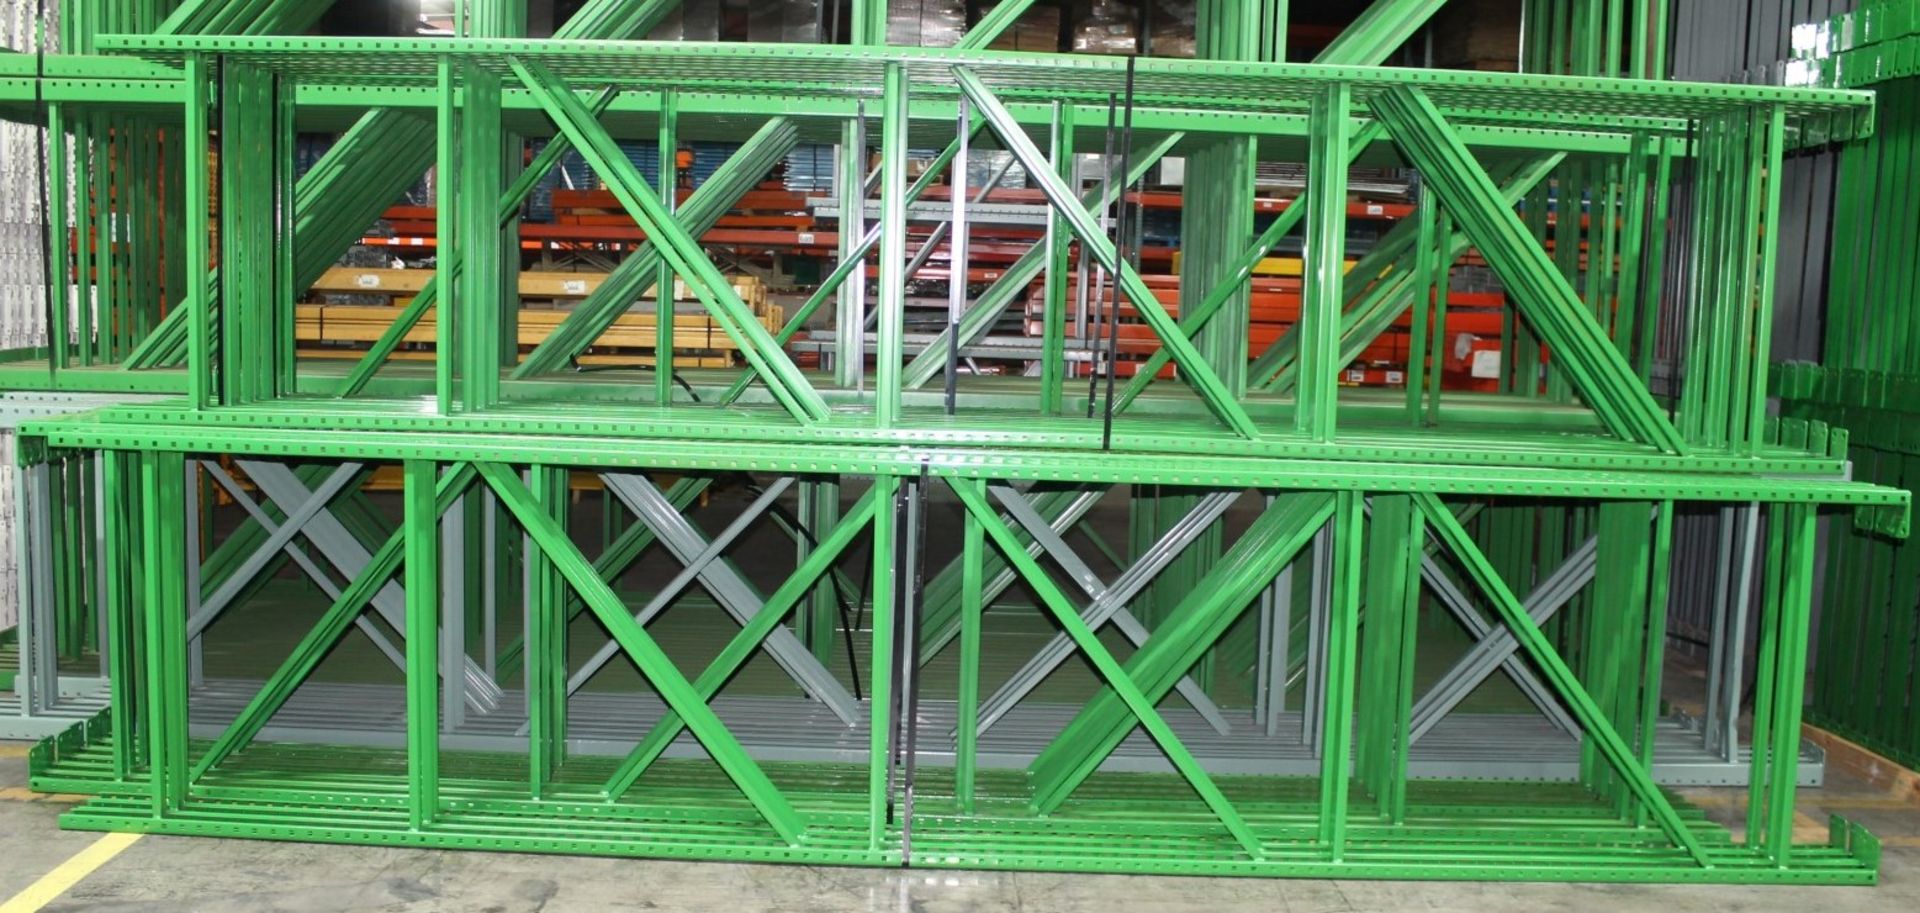 28 BAYS OF TEARDROP STYLE PALLET RACK, LIKE NEW, SIZE: 16'H x 42"D X 8'W - Image 2 of 5